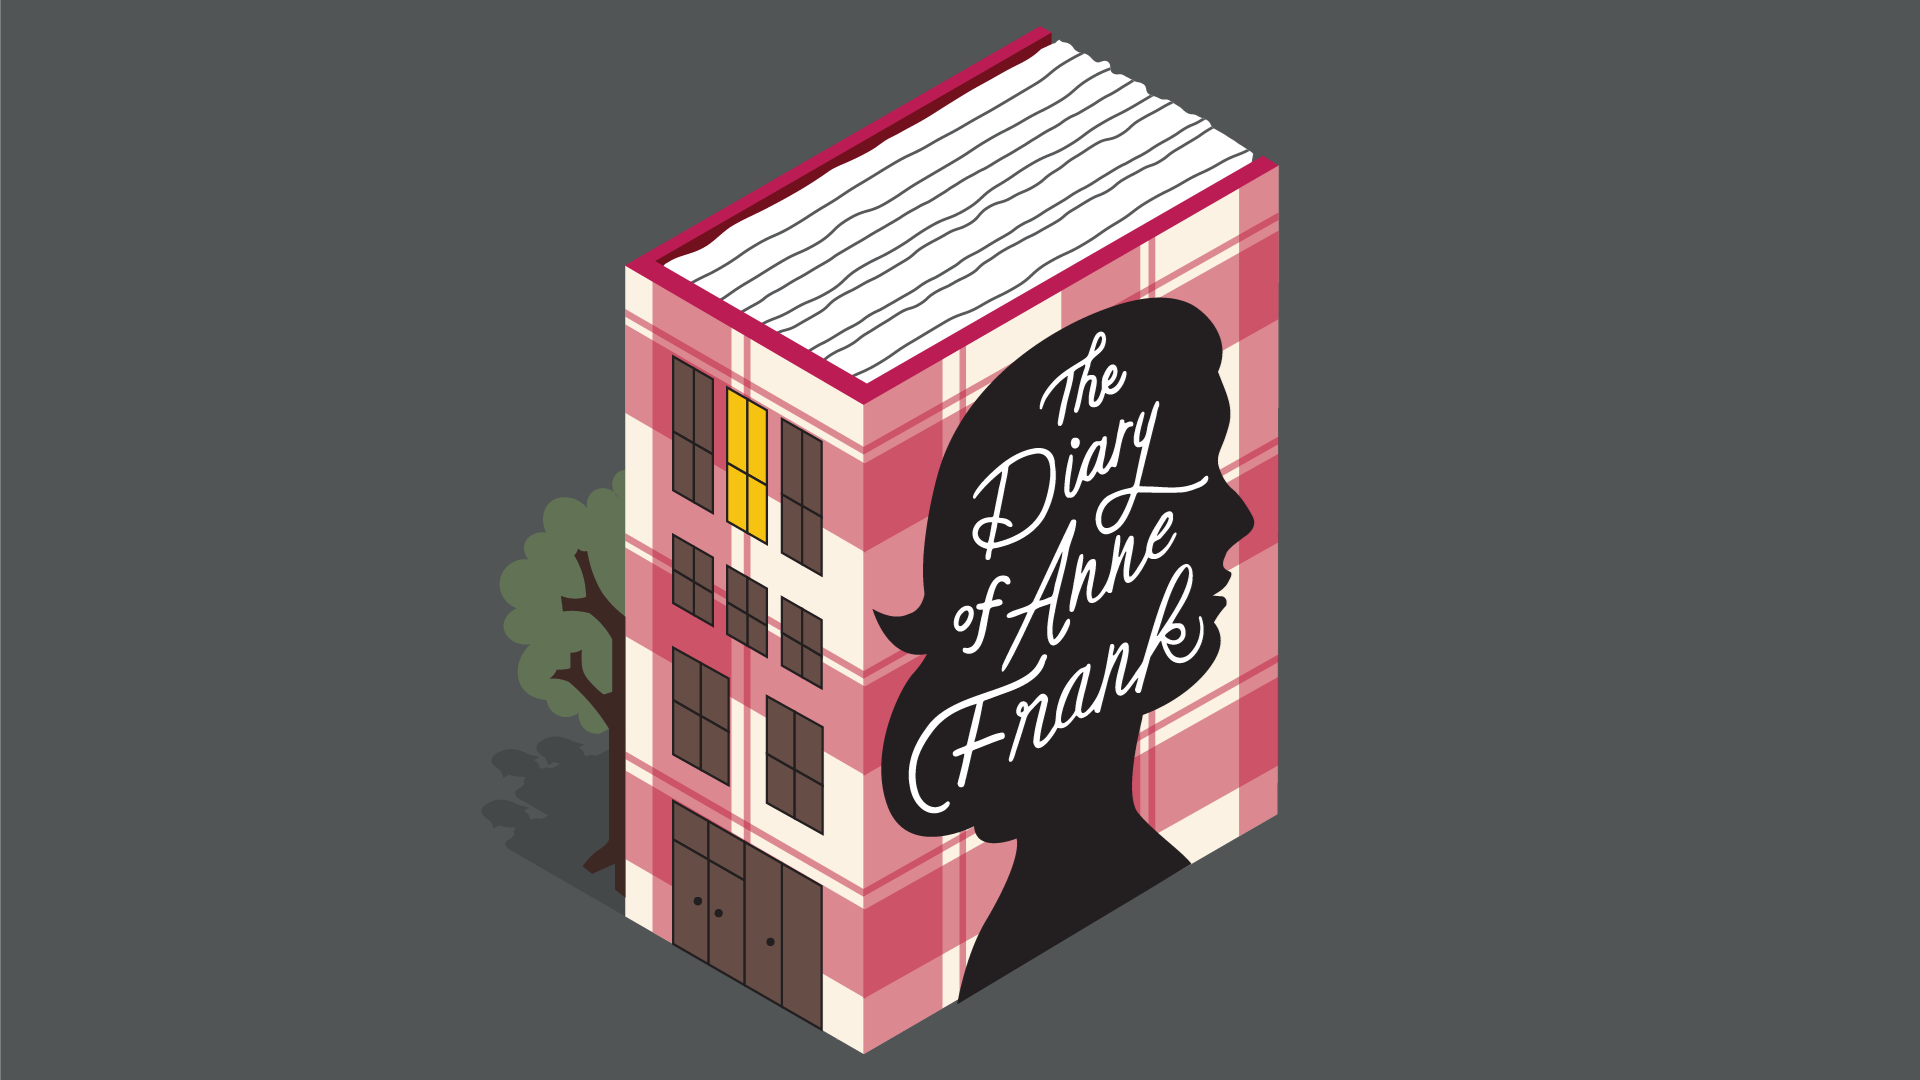 A graphic of a pink and white plaid book. The spine of the book has doors and windows like an apartment building. The front cover of the book has a silhouette of a girl's head. In the silhouette reads "The Diary of Anne Frank" in white, handwritten font. The background is gray. 